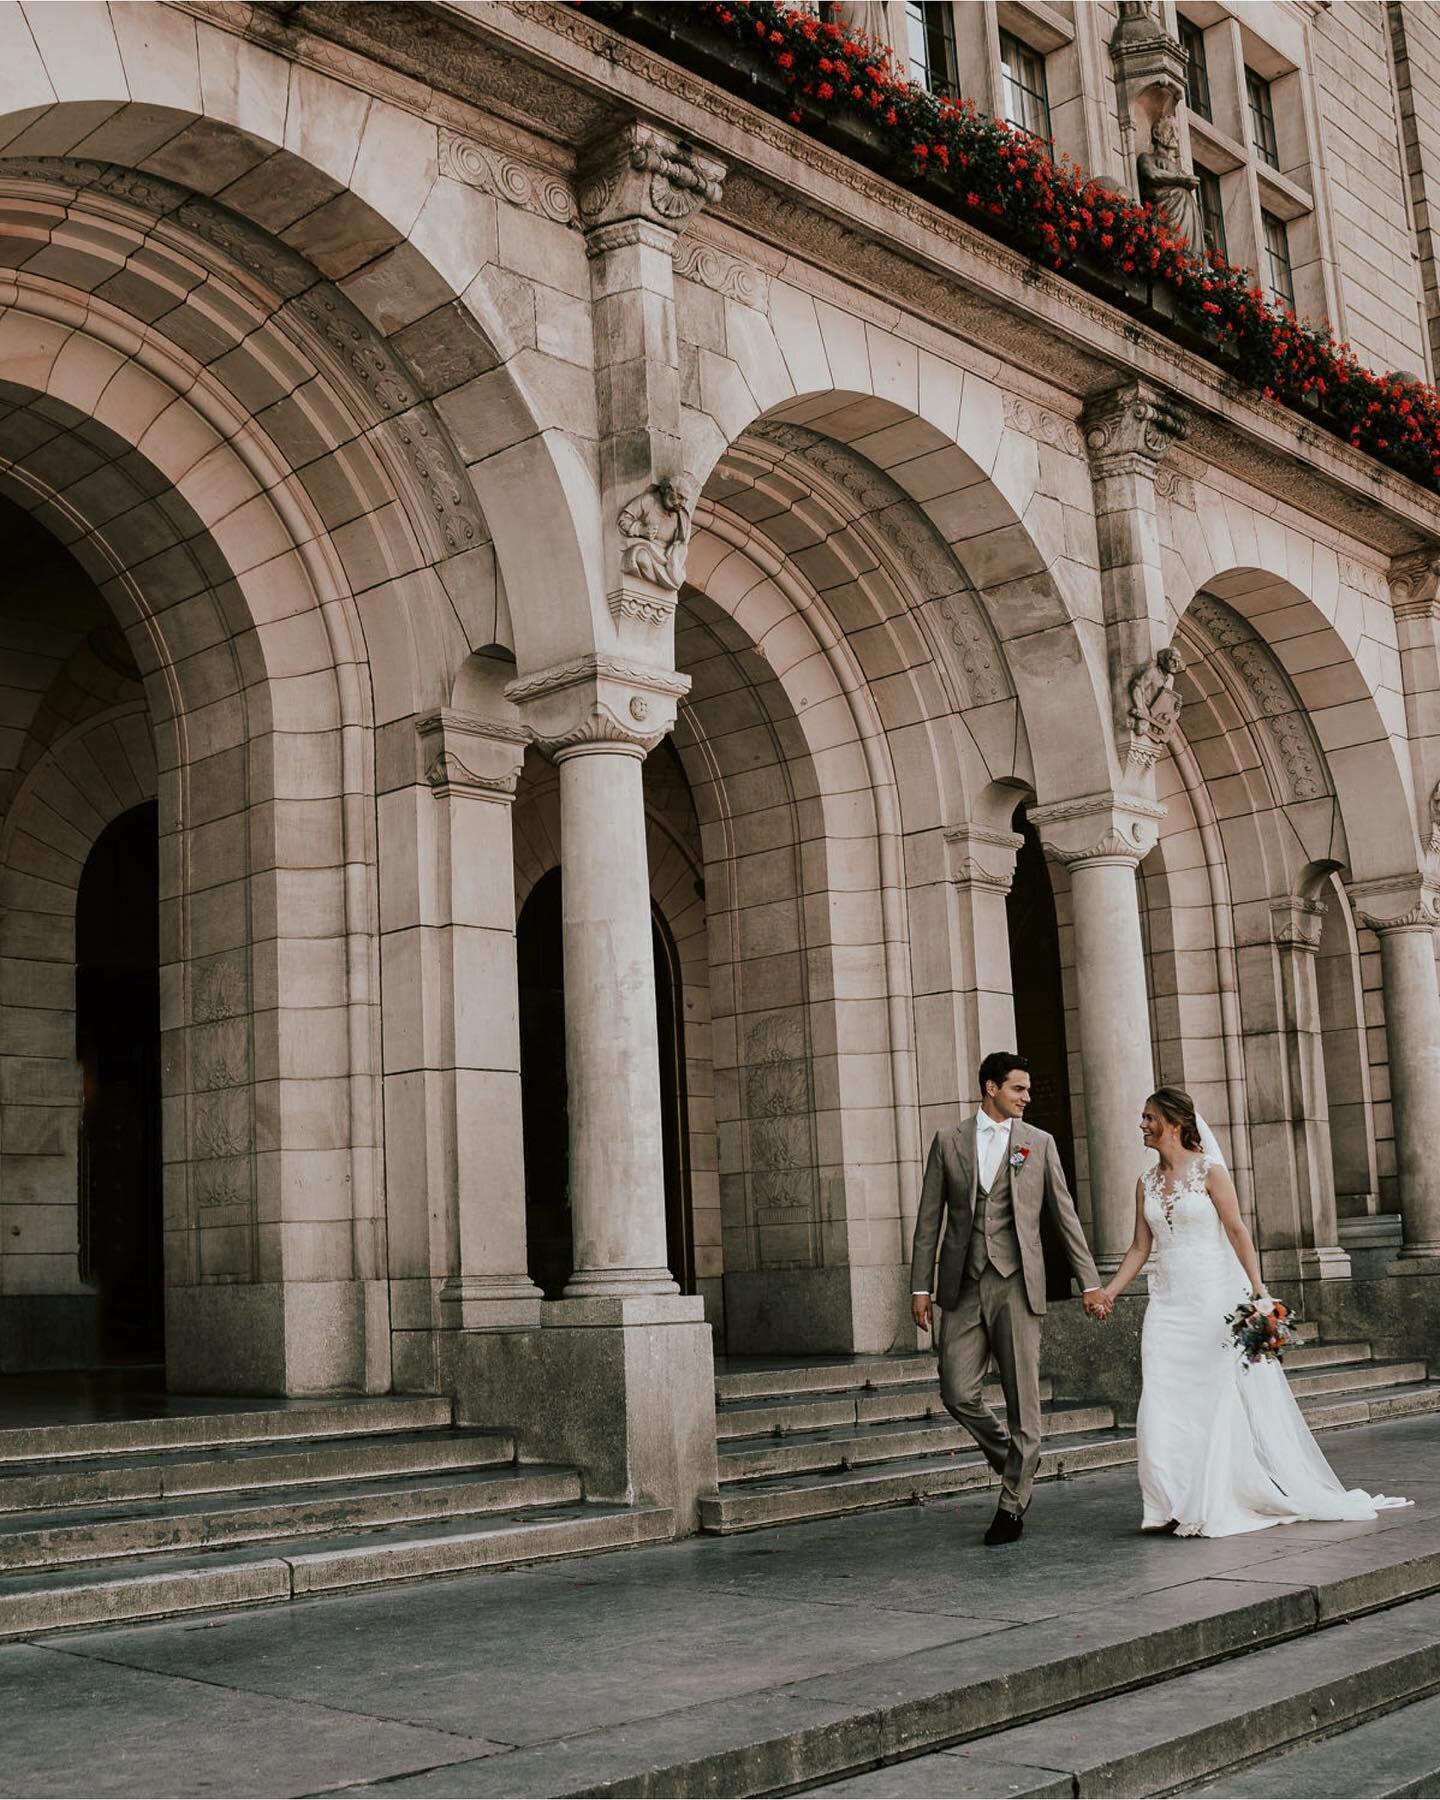 // So it&rsquo;s always been a dream of mine to shoot at this beautiful Cityhall of Rotterdam. With beautiful A and T I got to hop around Rotterdam on their wedding day both at the waterfront and in the cityhall. Such a dream! I&rsquo;m putting the f